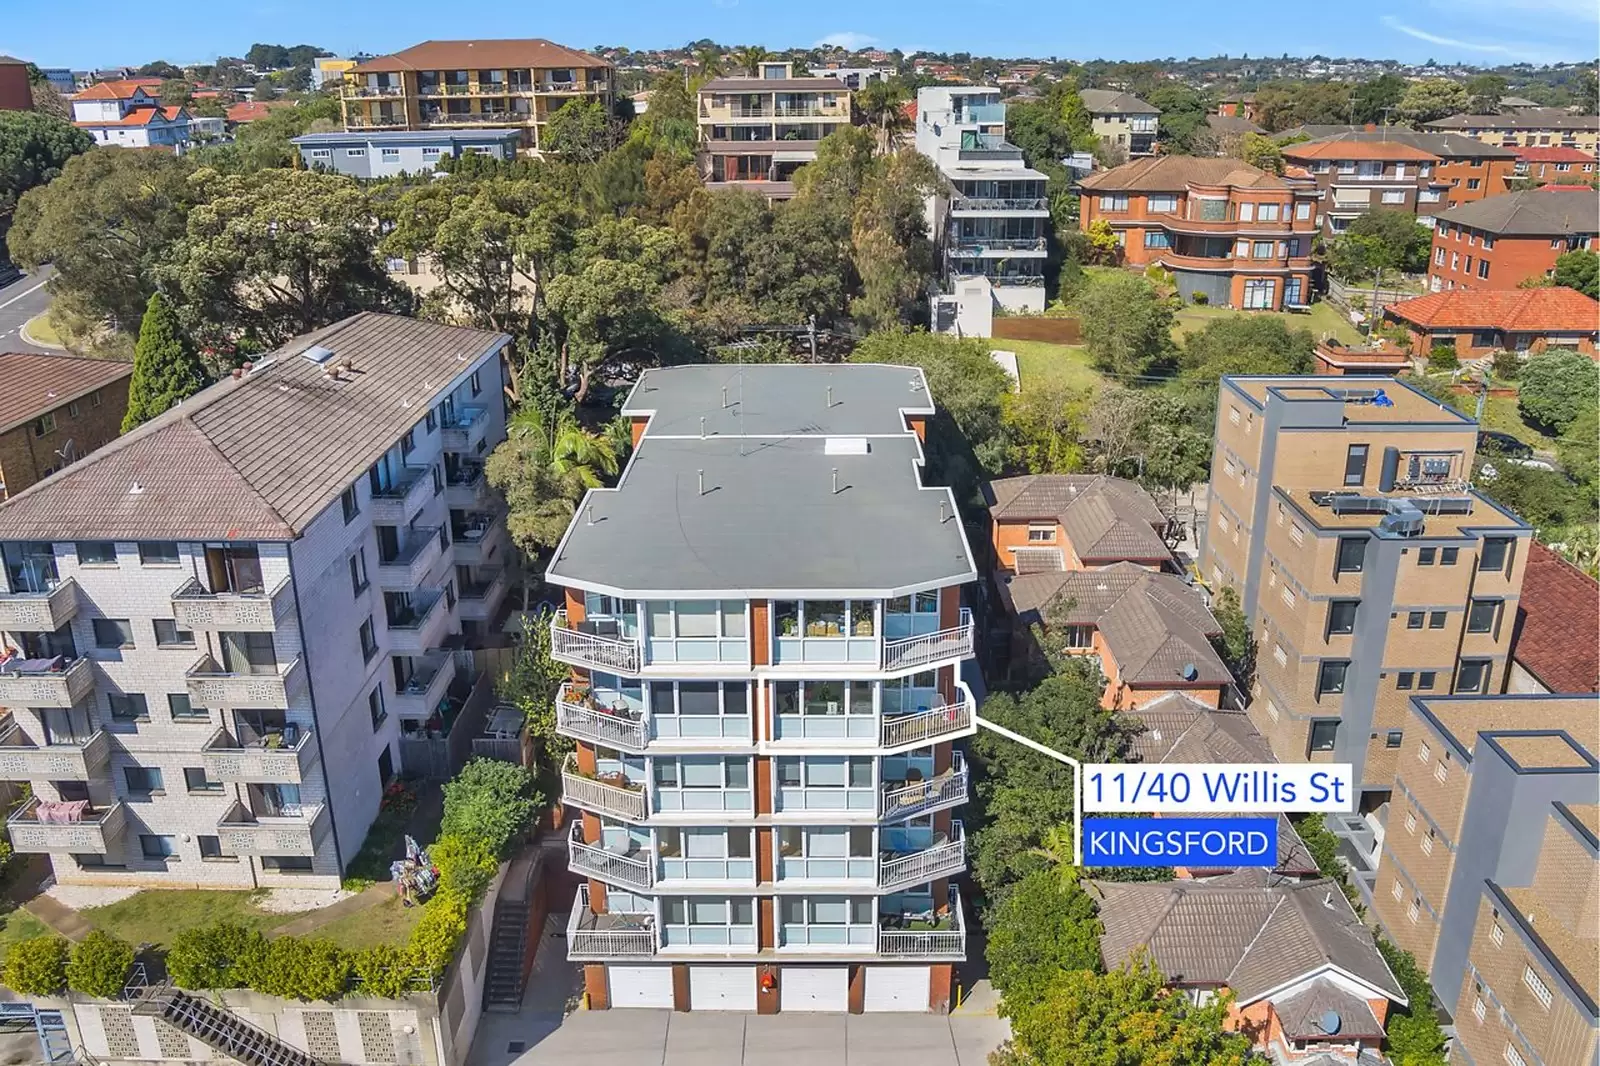 Photo #9: 11/40 Willis St, Kingsford - Sold by Sydney Sotheby's International Realty